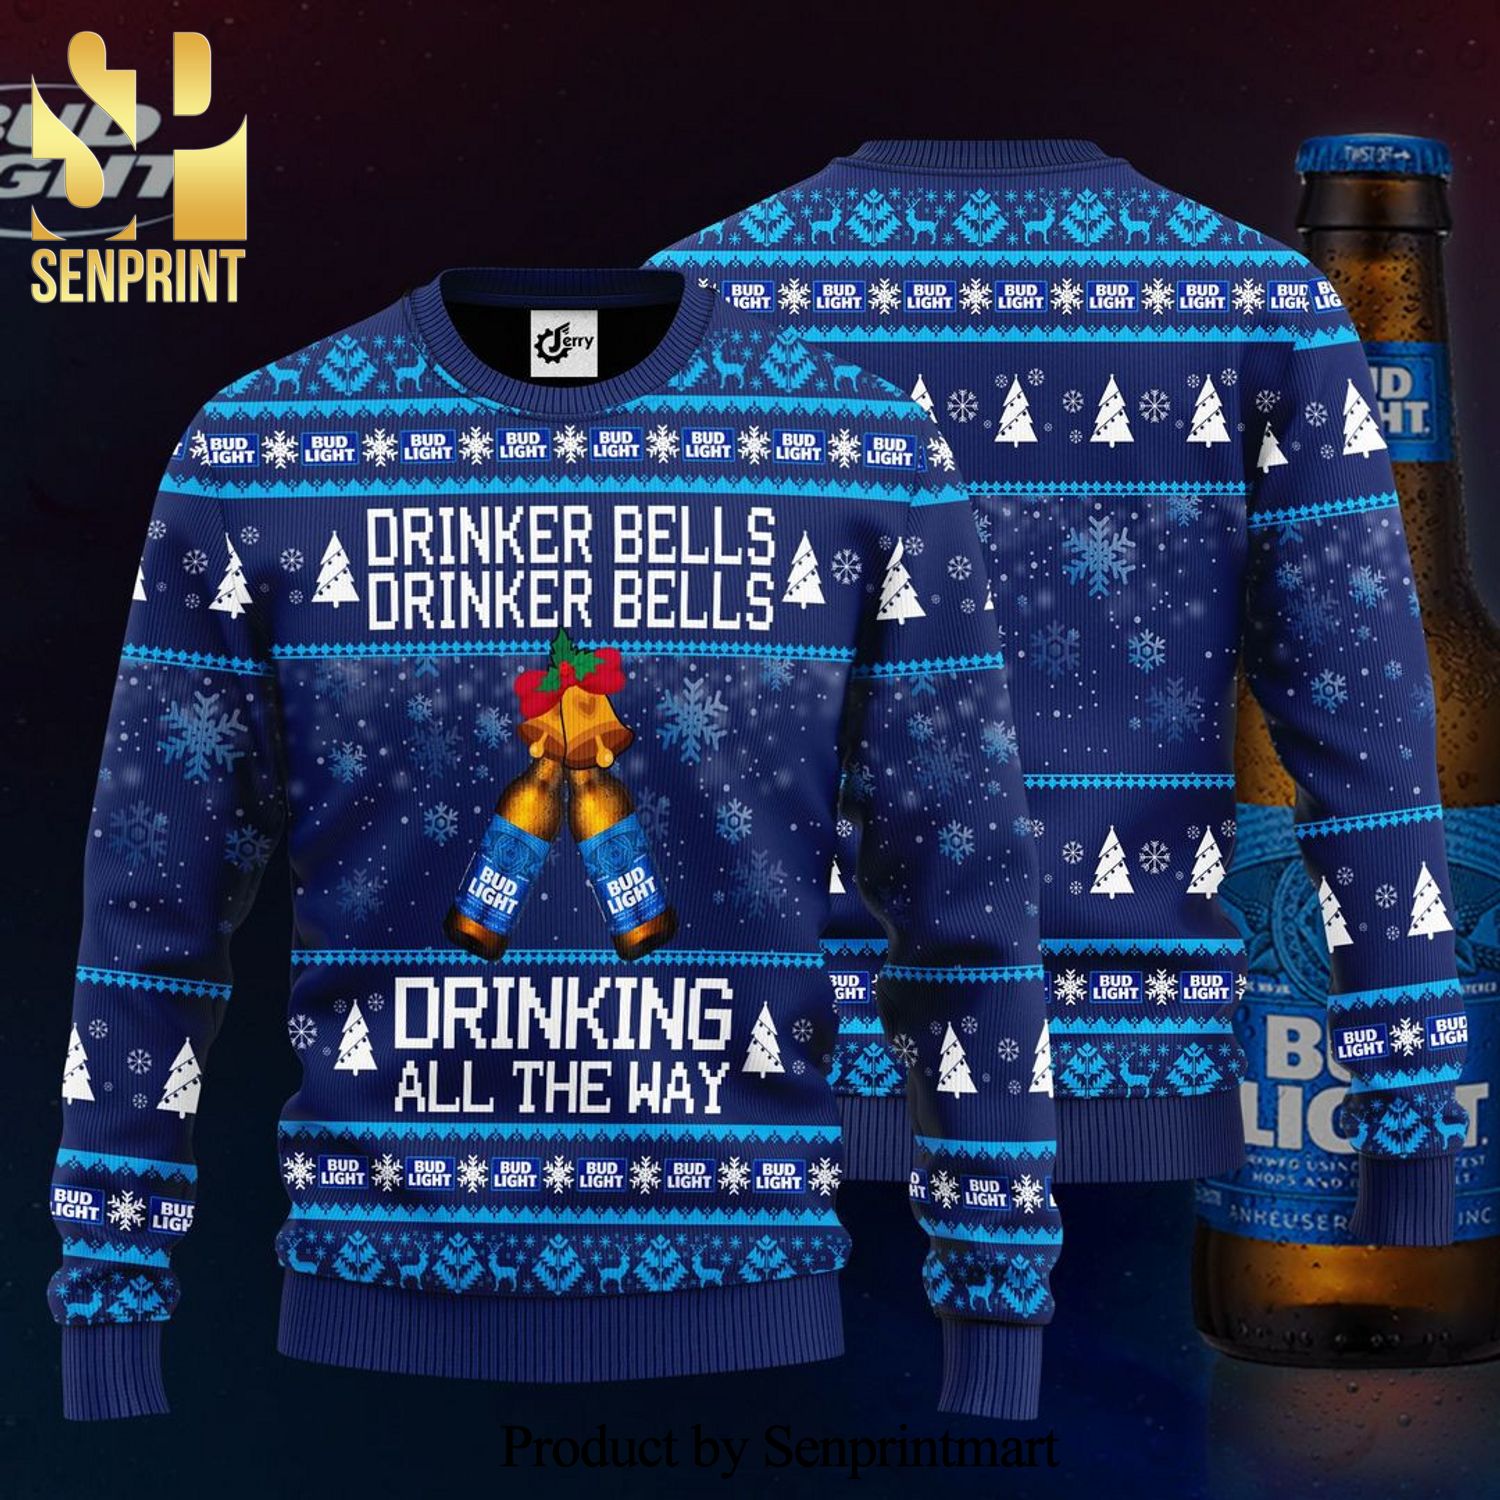 Bud Light Drinker Bells Drinker Bells Drinking All The Way Knitted Ugly Christmas Sweater